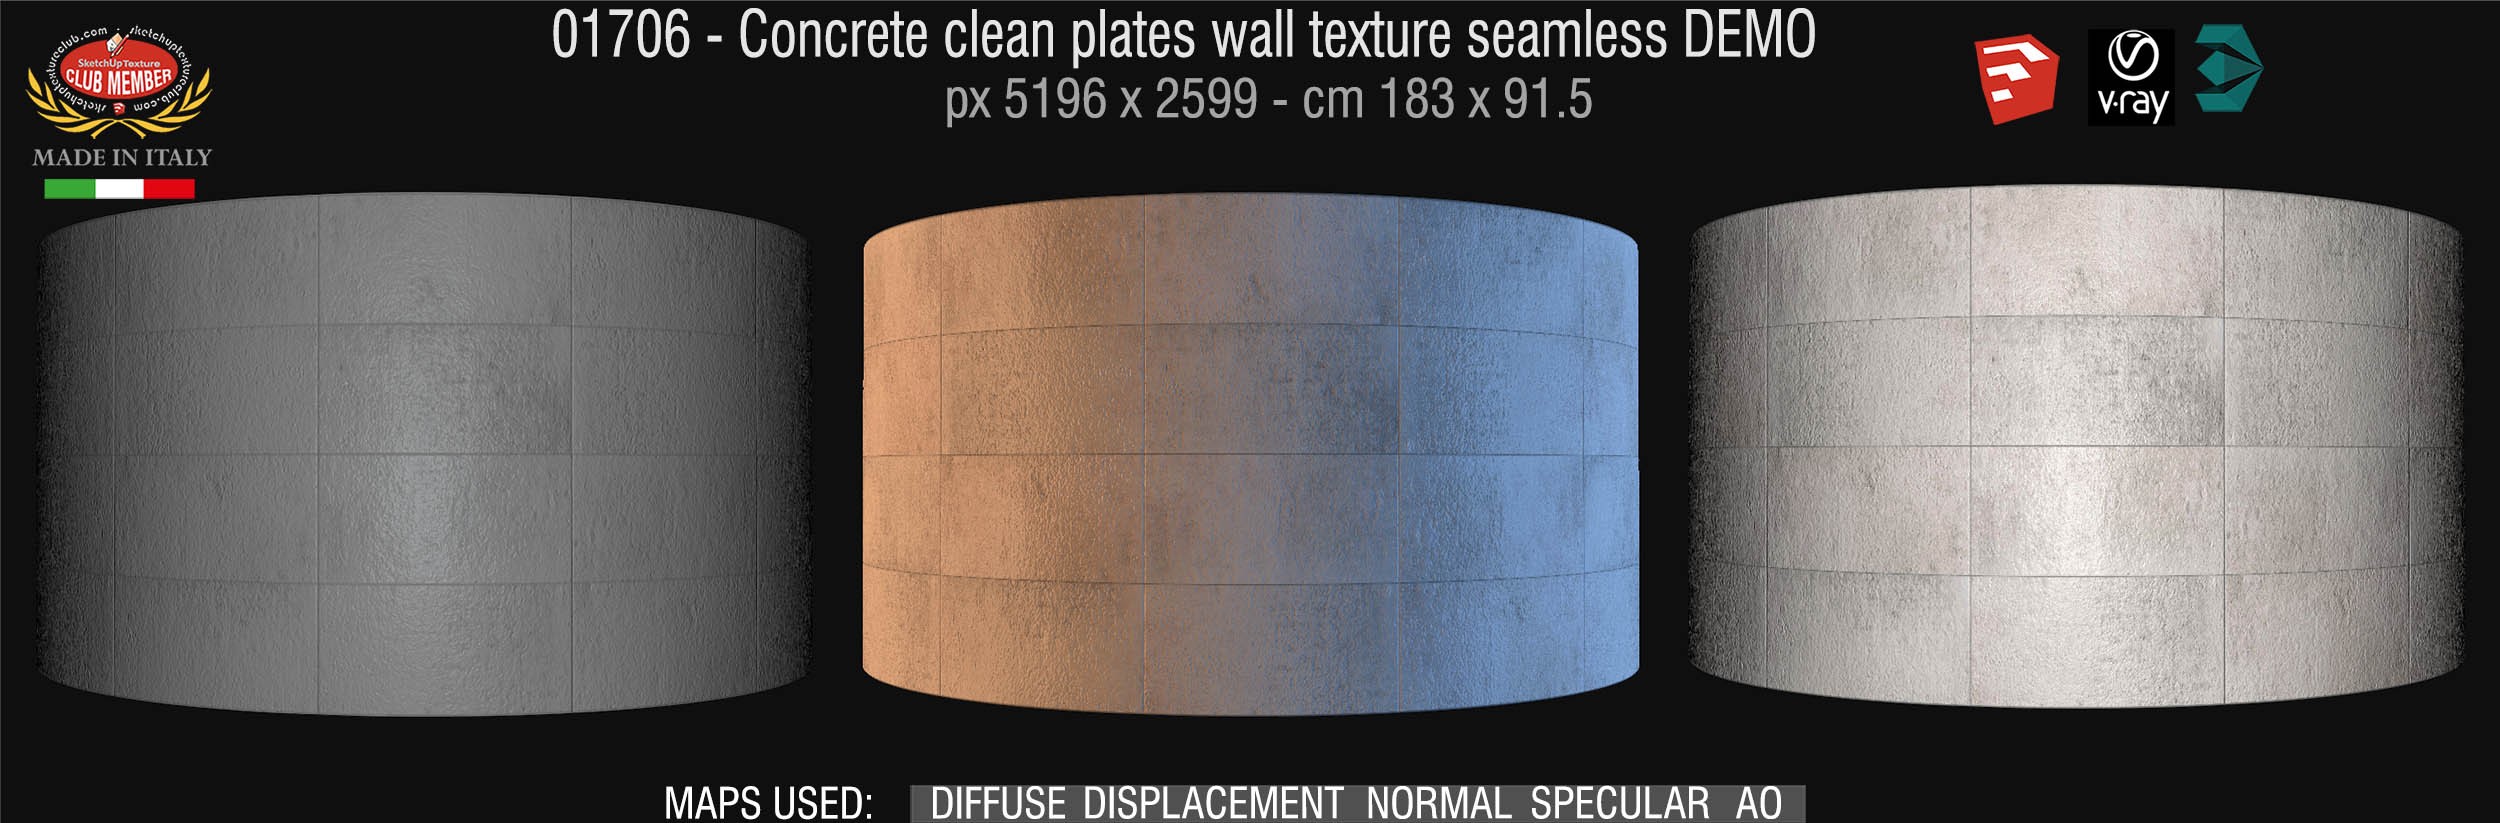 01706 Concrete clean plates wall texture seamless + maps DEMO